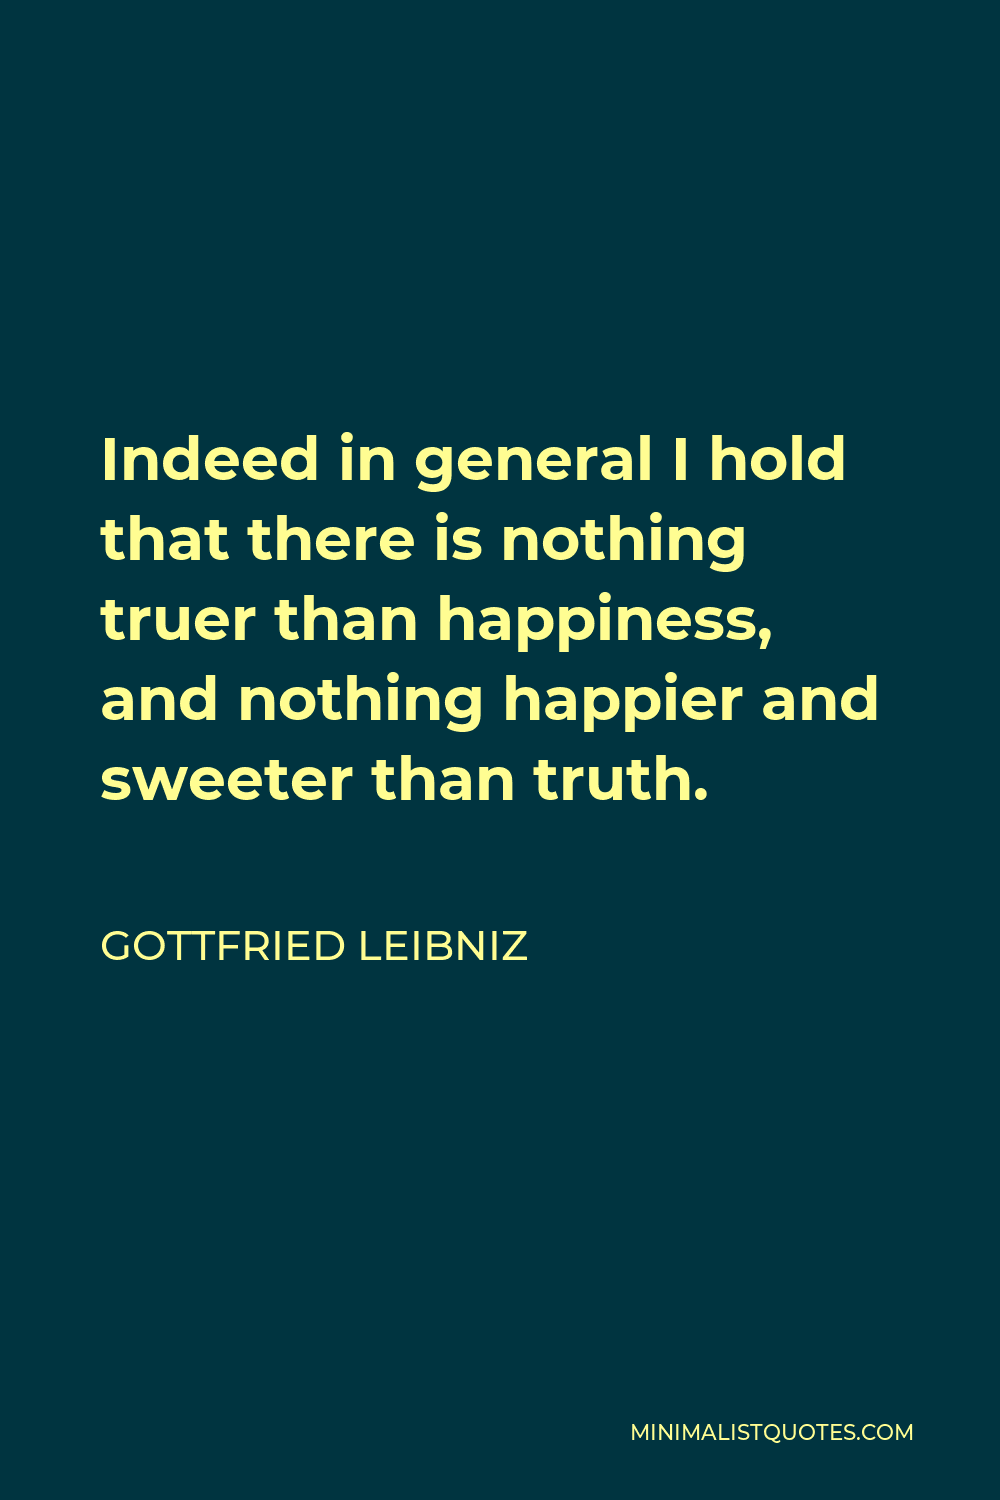 Gottfried Wilhelm Leibniz Quote - Indeed in general I hold that there is nothing truer than happiness, and nothing happier and sweeter than truth.